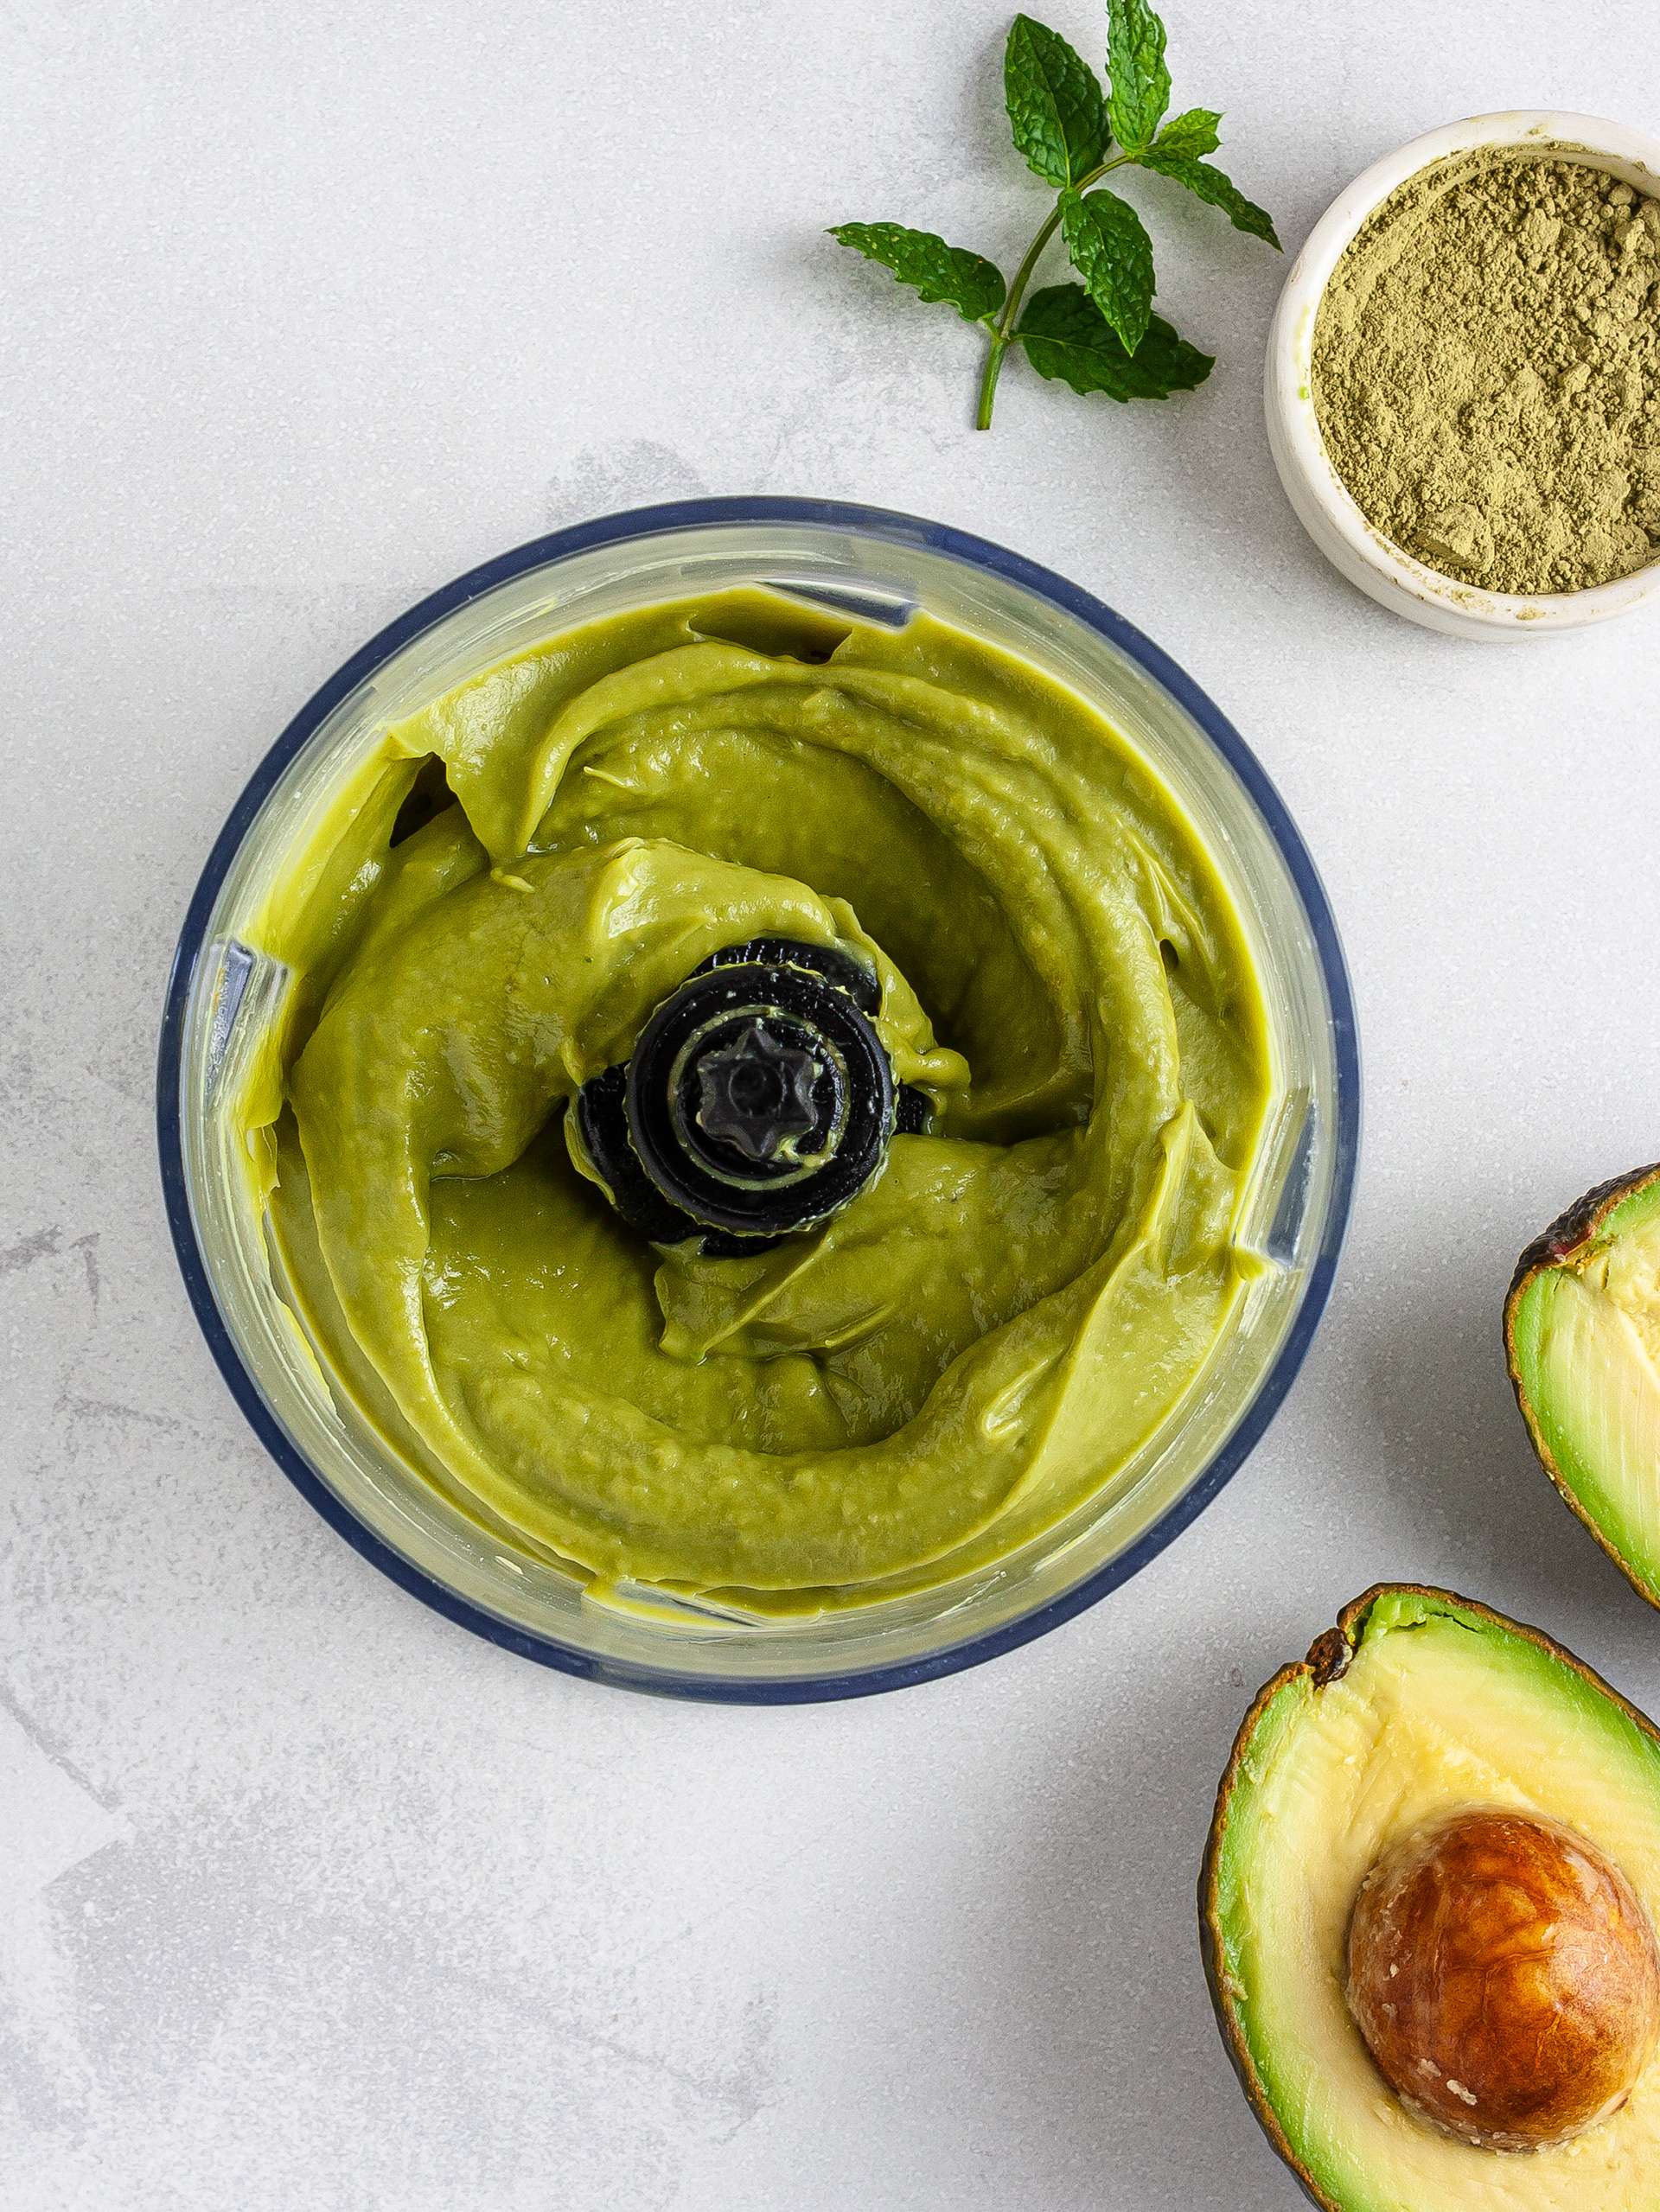 Blitzed avocado with with matcha